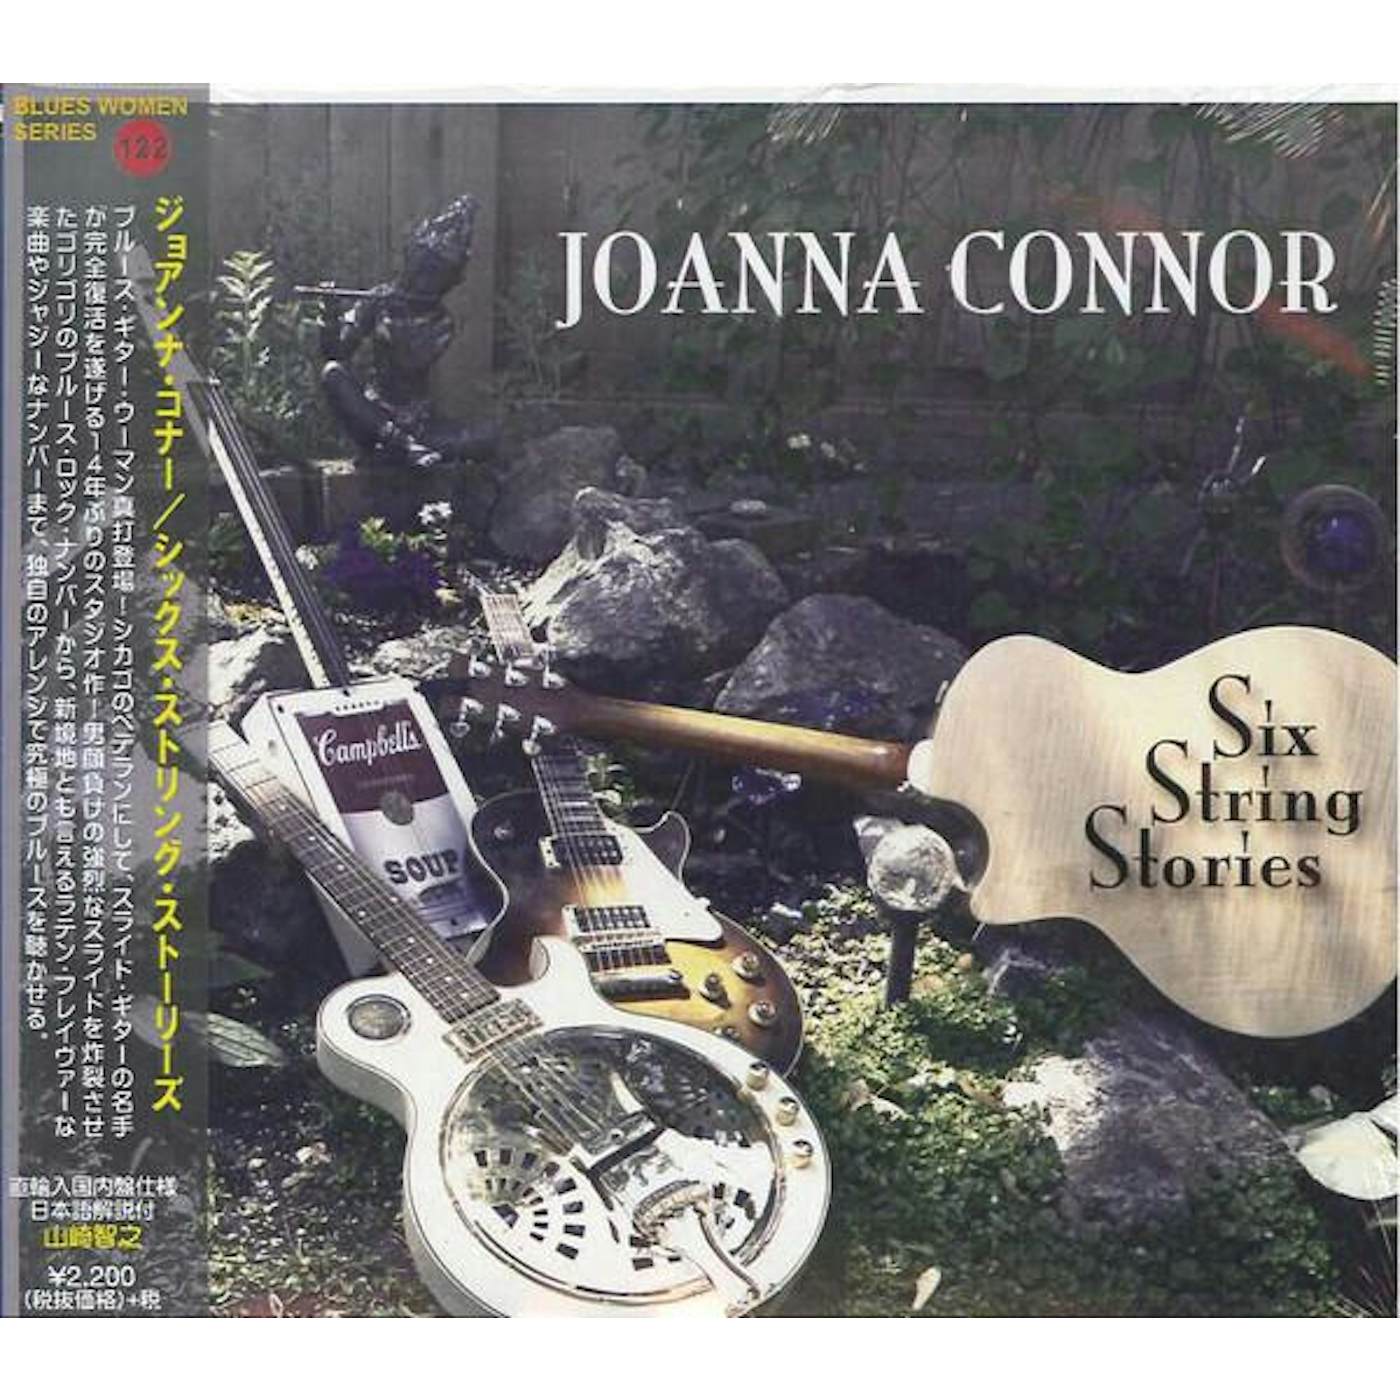 Joanna Connor SIX STRING STORIES CD